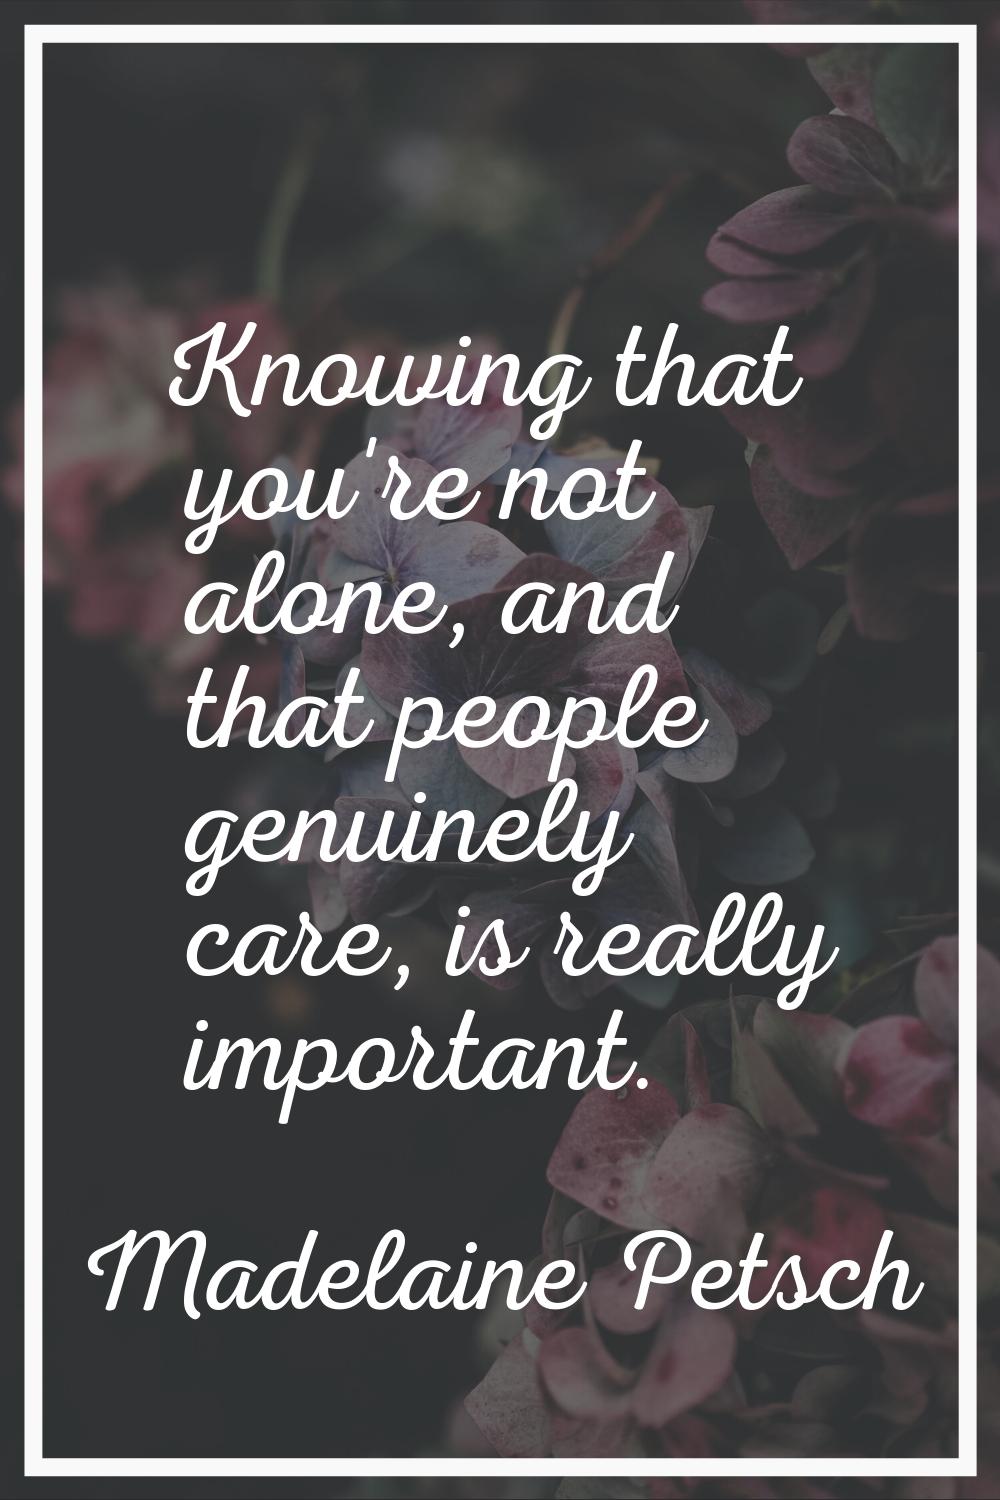 Knowing that you're not alone, and that people genuinely care, is really important.